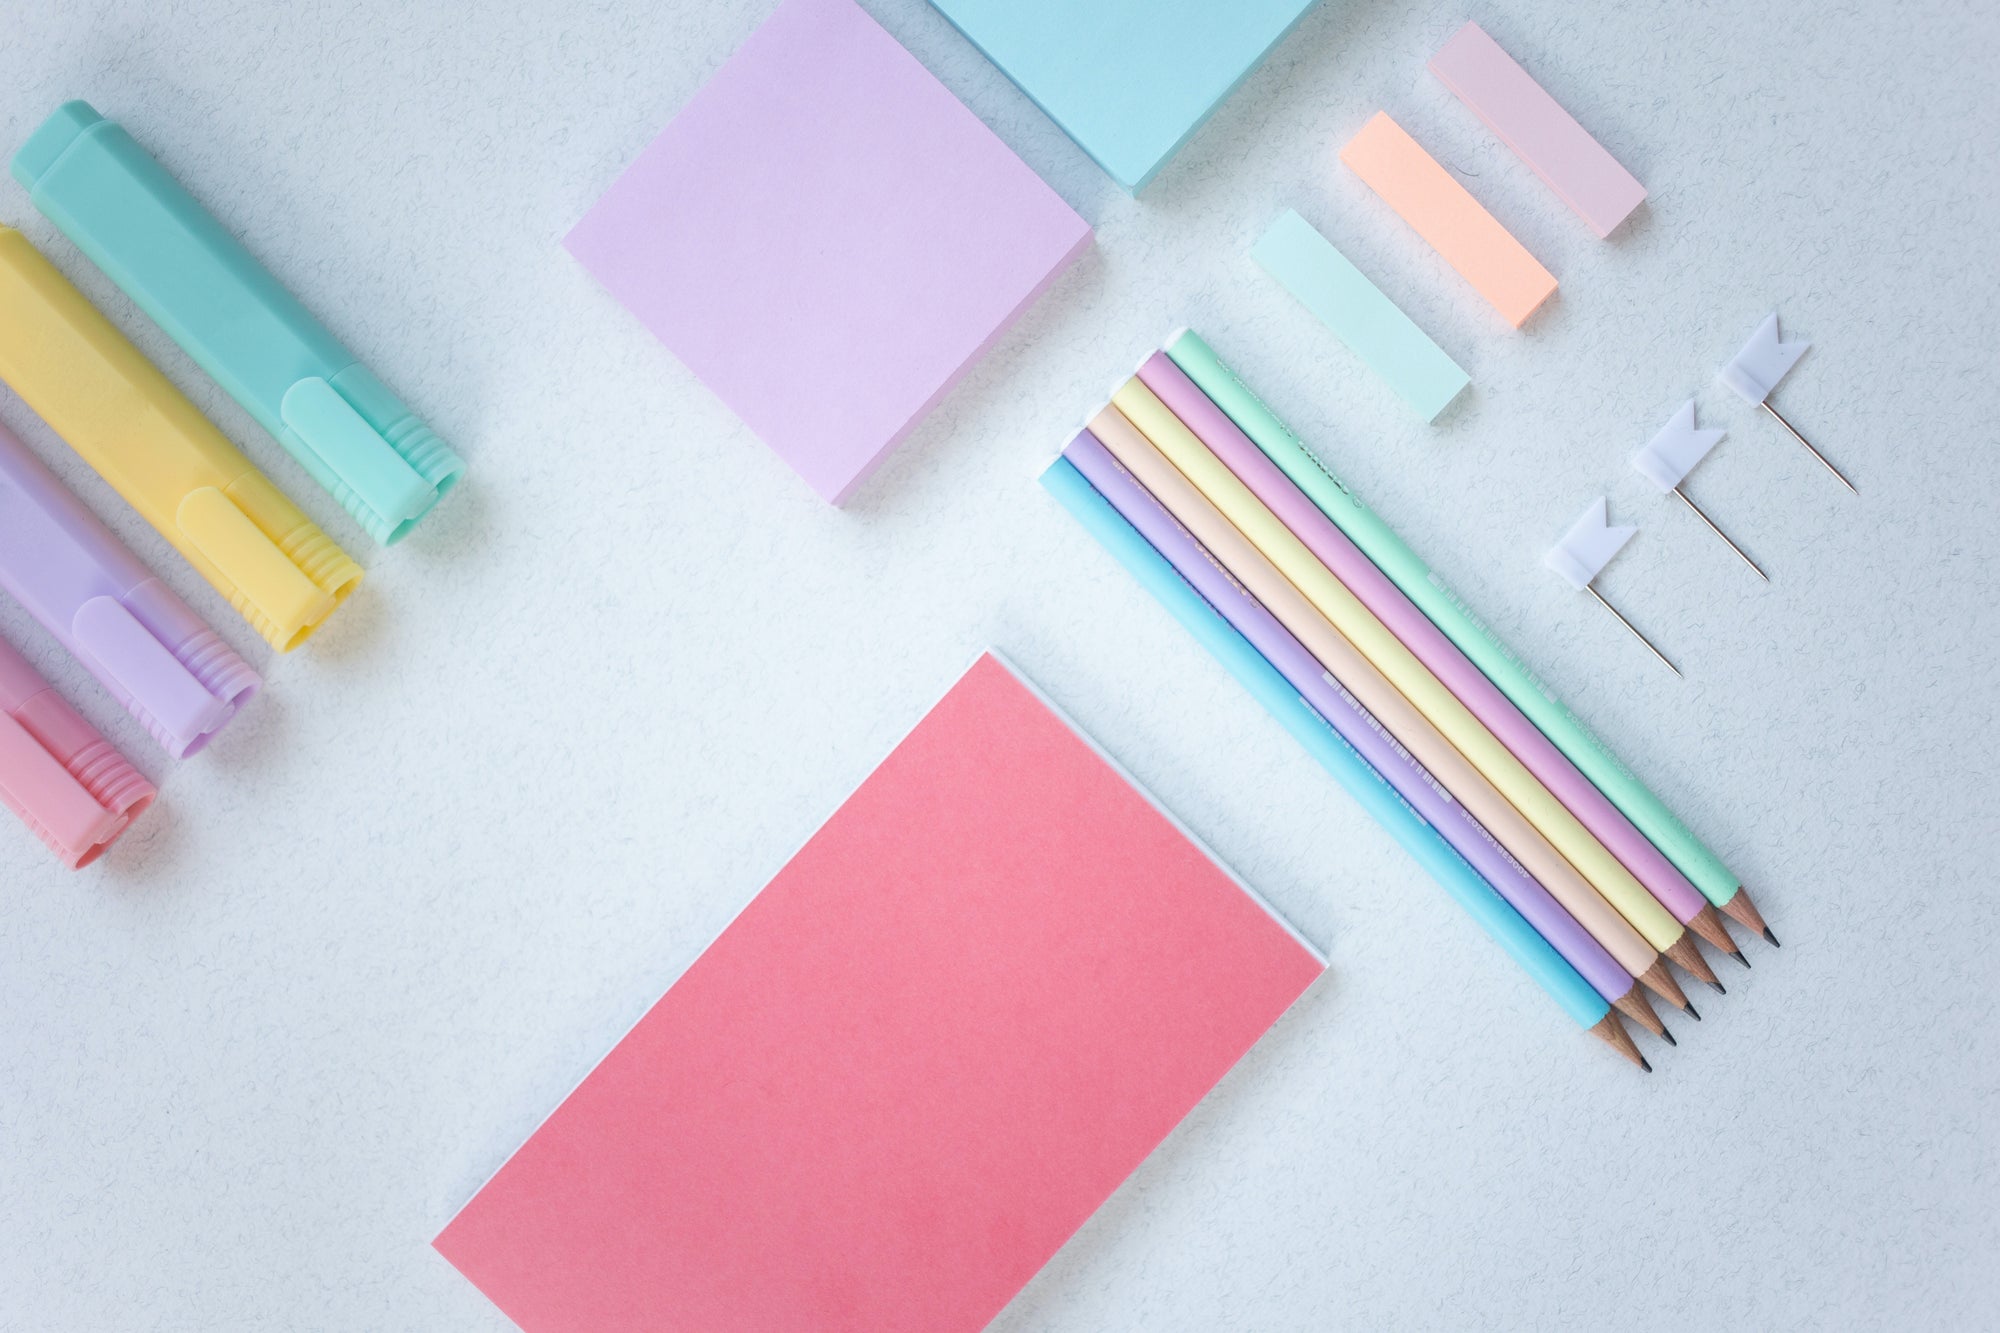 Pastel color bullet journal supplies on a white table like pencils, highlighters, post its, flags and colored paper.